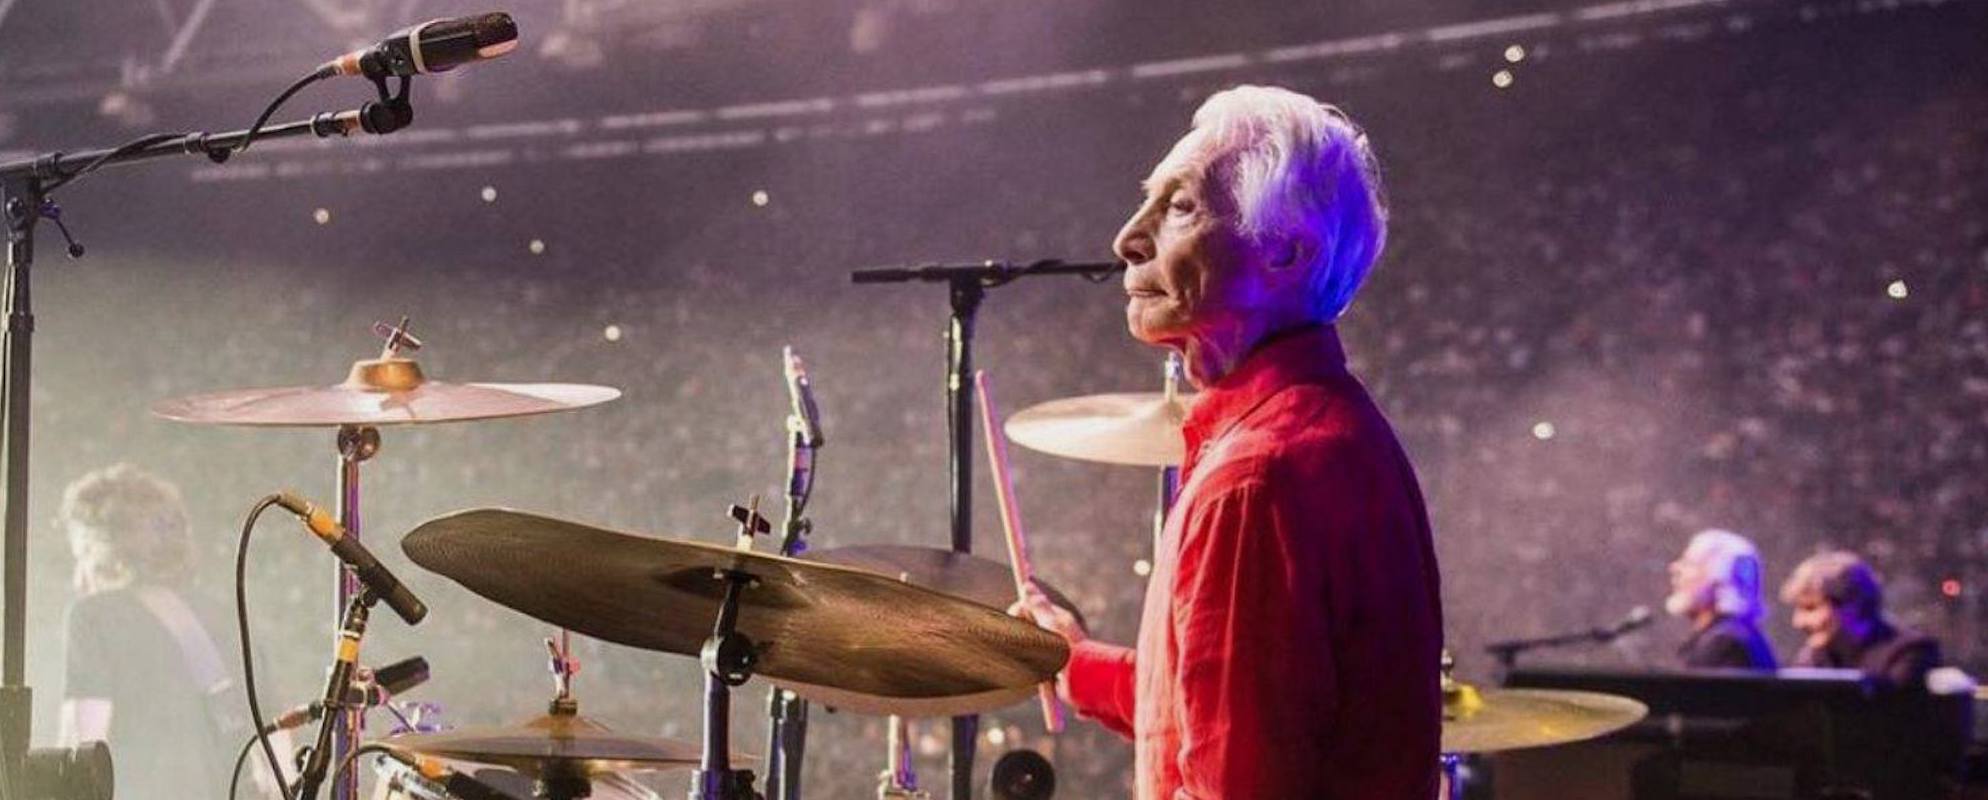 Rolling Stones’ Drummer Charlie Watts to Miss 2021 ‘No Filter’ Tour, Says “The Show Must Go On”